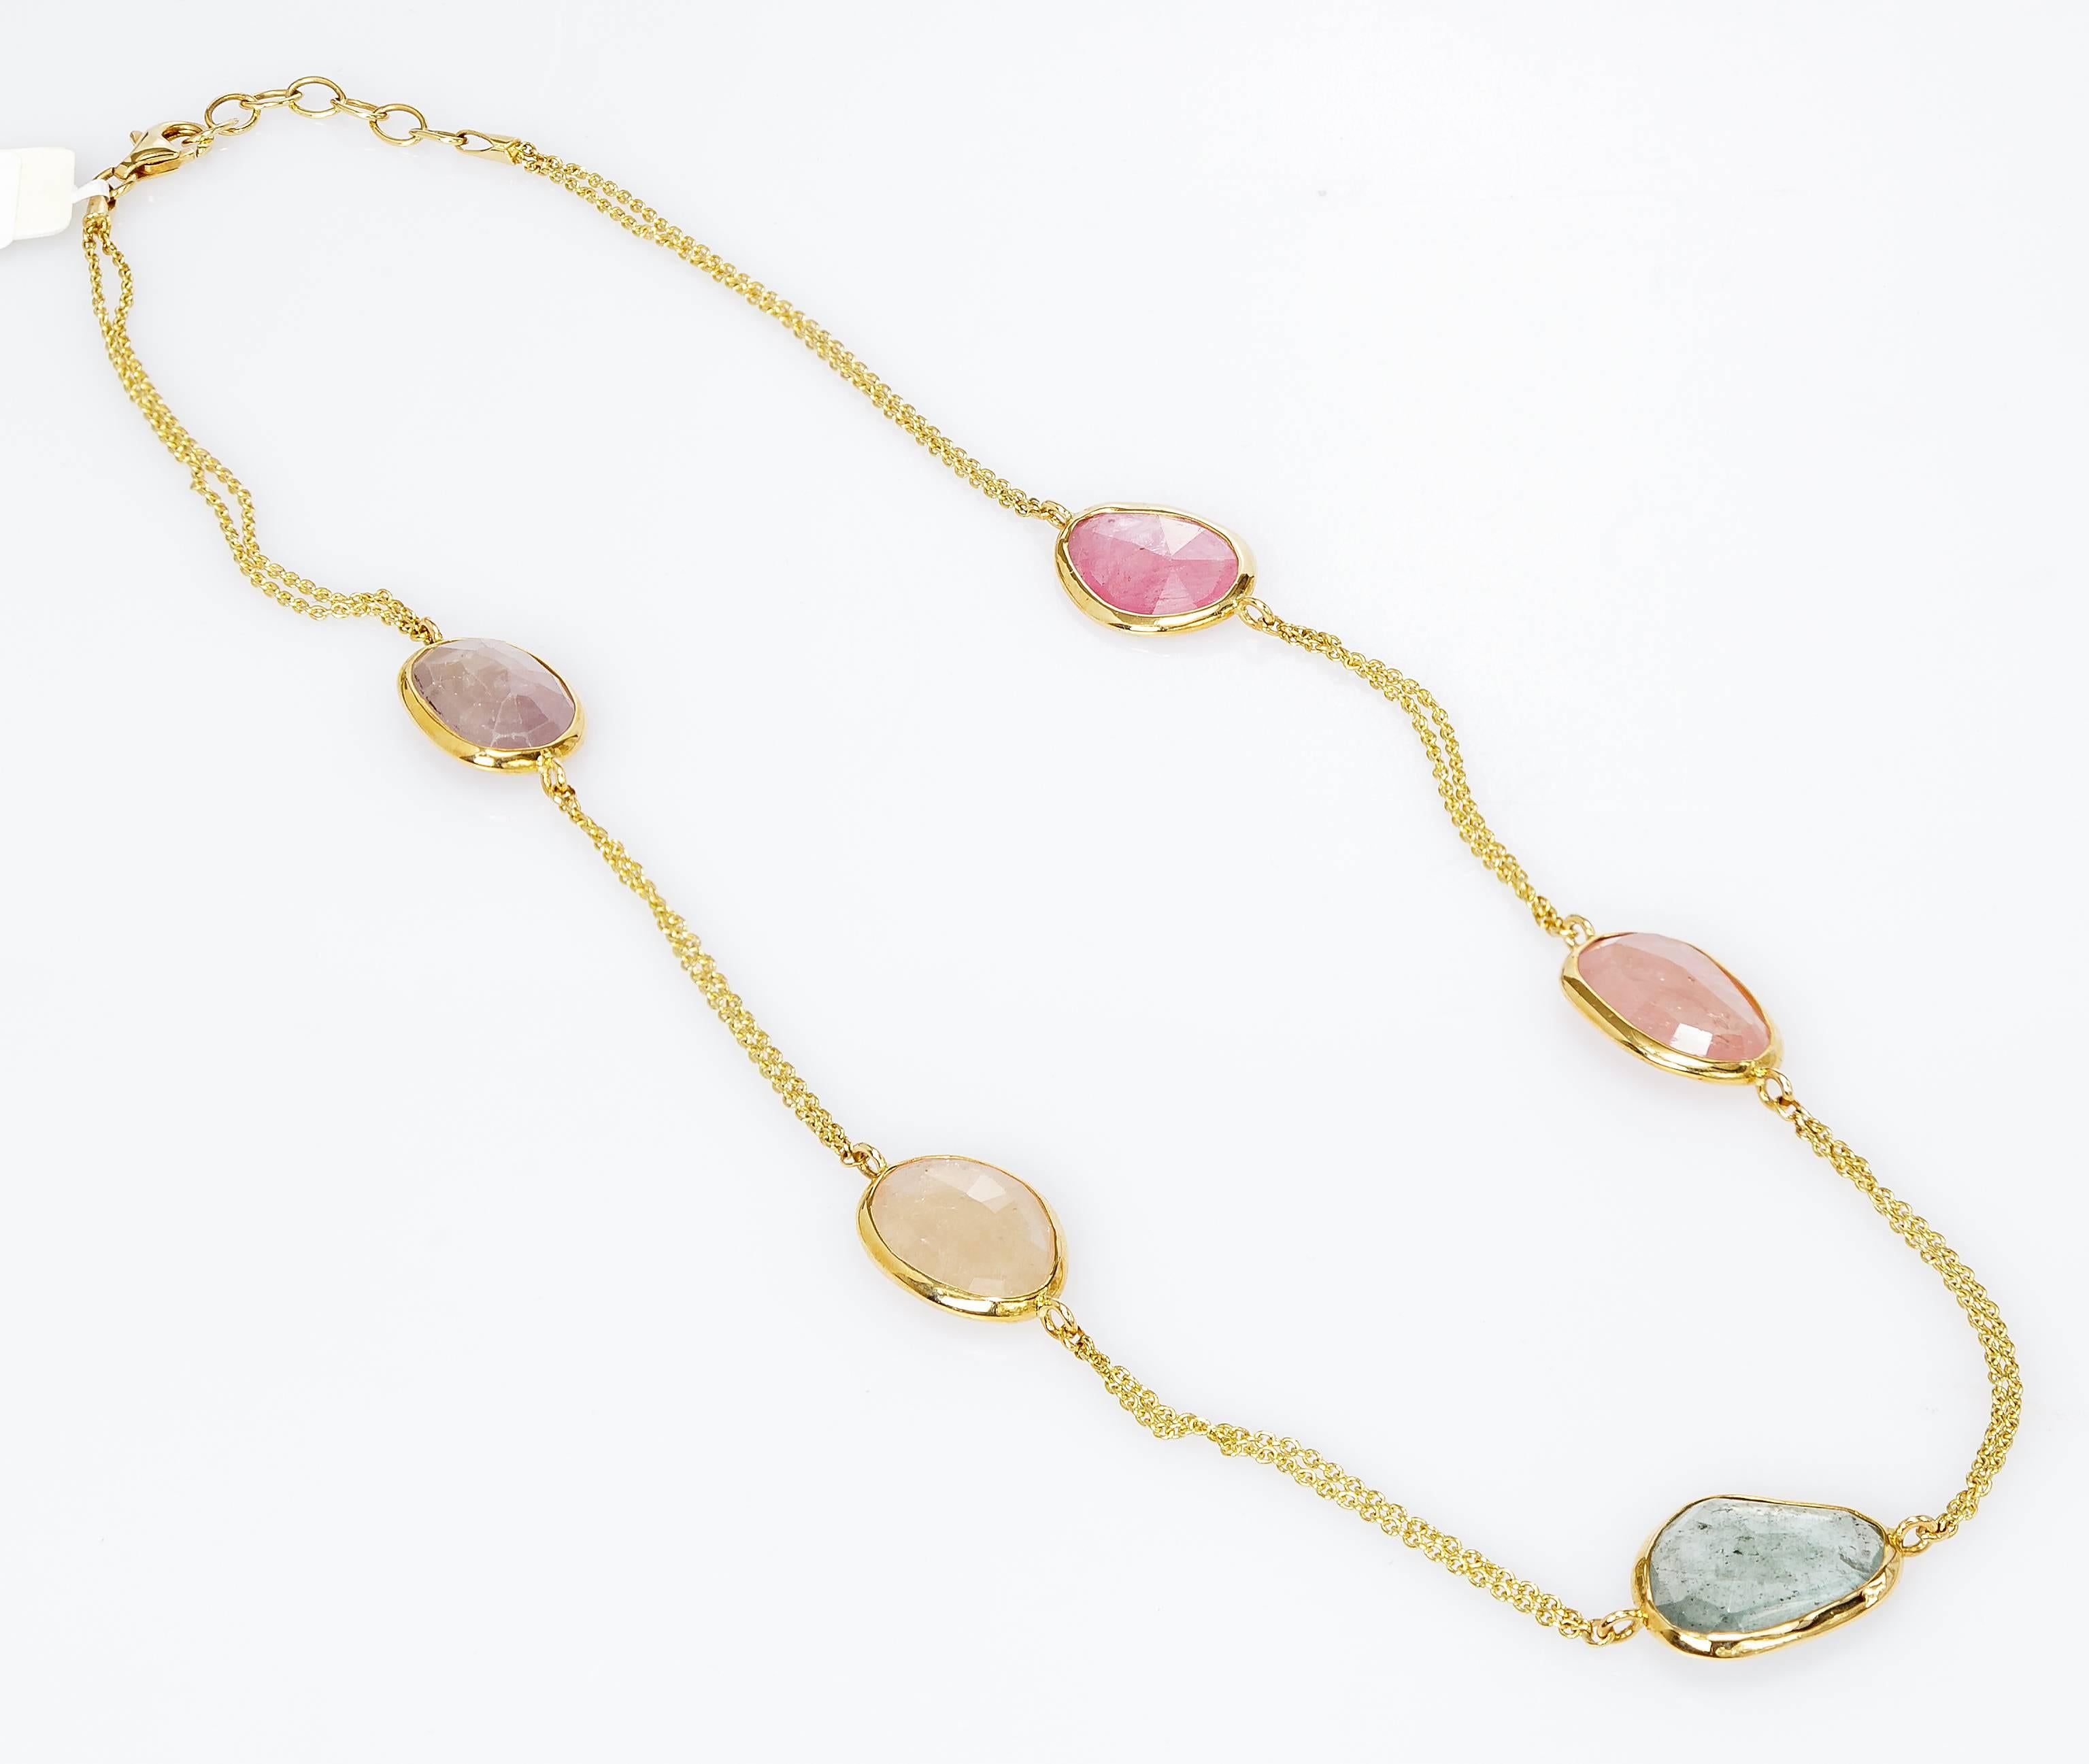 This Yvel necklace features five natural color rose cut sapphires linked by an 18k yellow gold chain.  The necklace measures 17 inches.